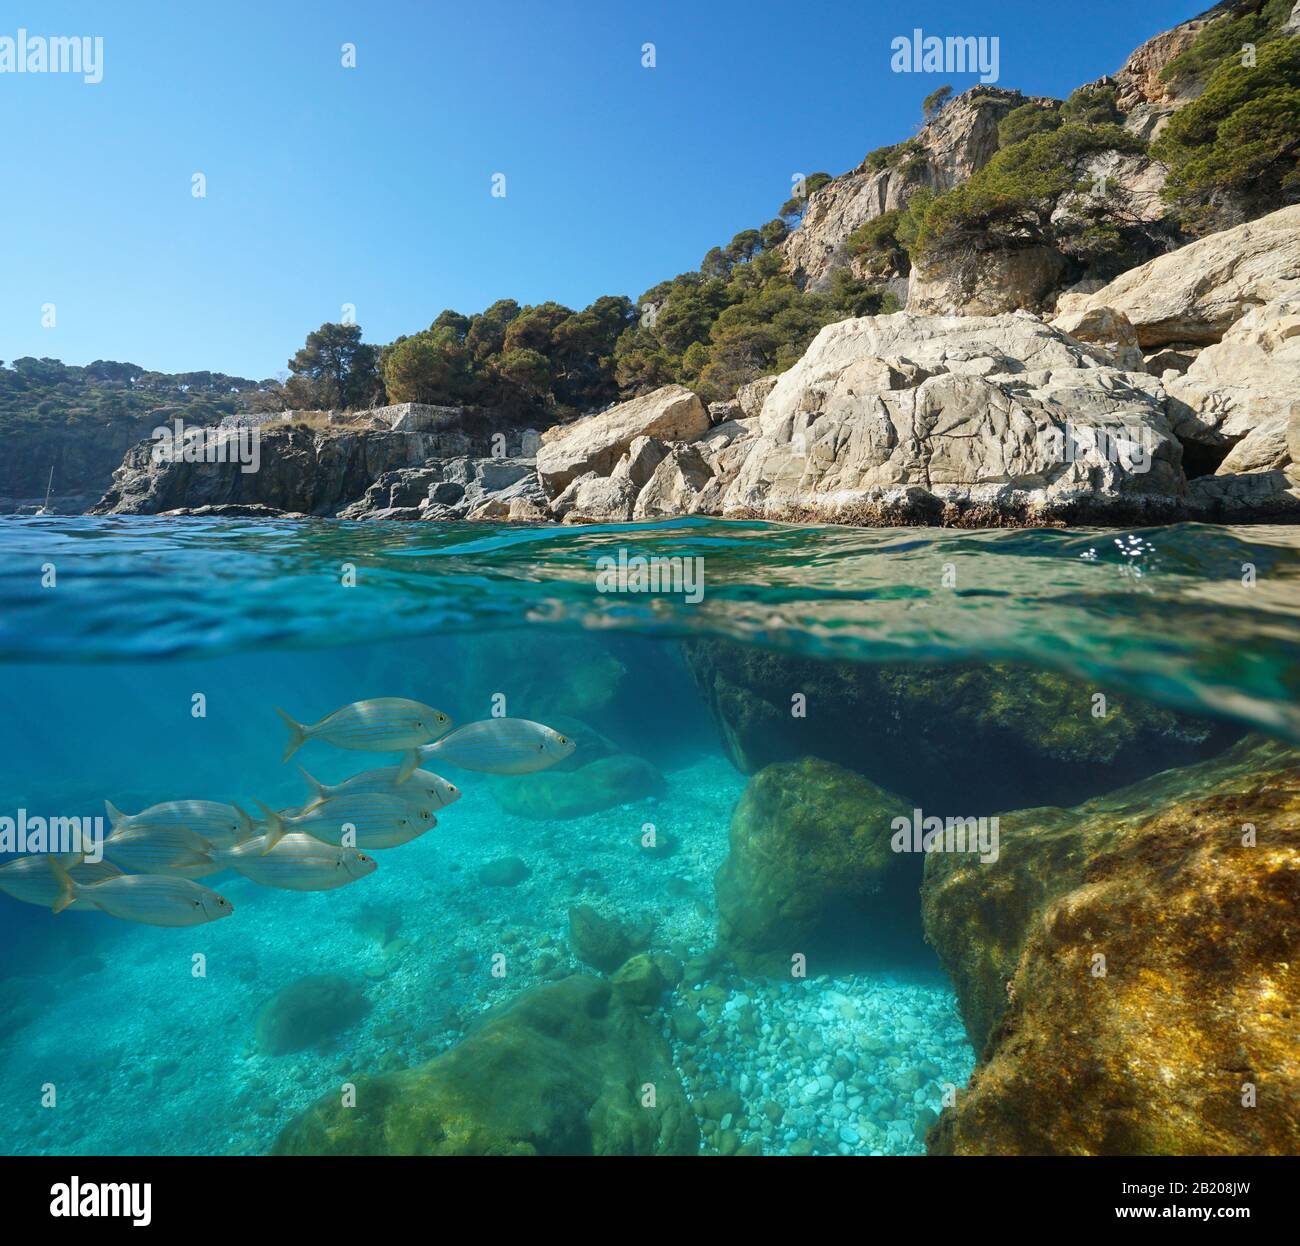 Seascape Mediterranean sea, rocky coast with fish underwater, split view over and under water surface, Spain, Costa Brava, Roses, Catalonia Stock Photo